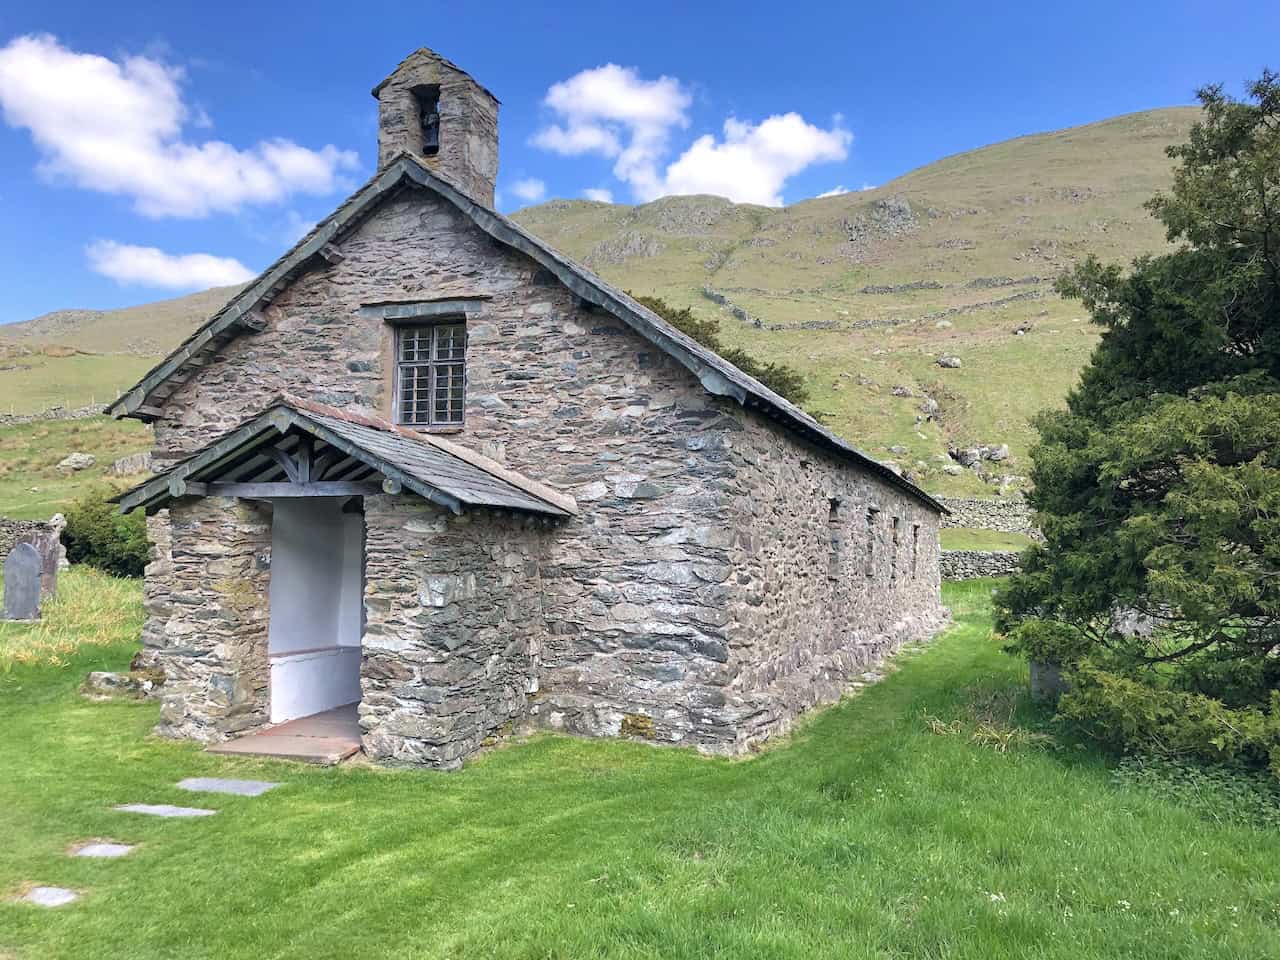 St Martin’s Church, Martindale, often referred to as the 'Old Church' to avoid confusion with the nearby St Peter‘s Church which is situated half a mile down the valley.